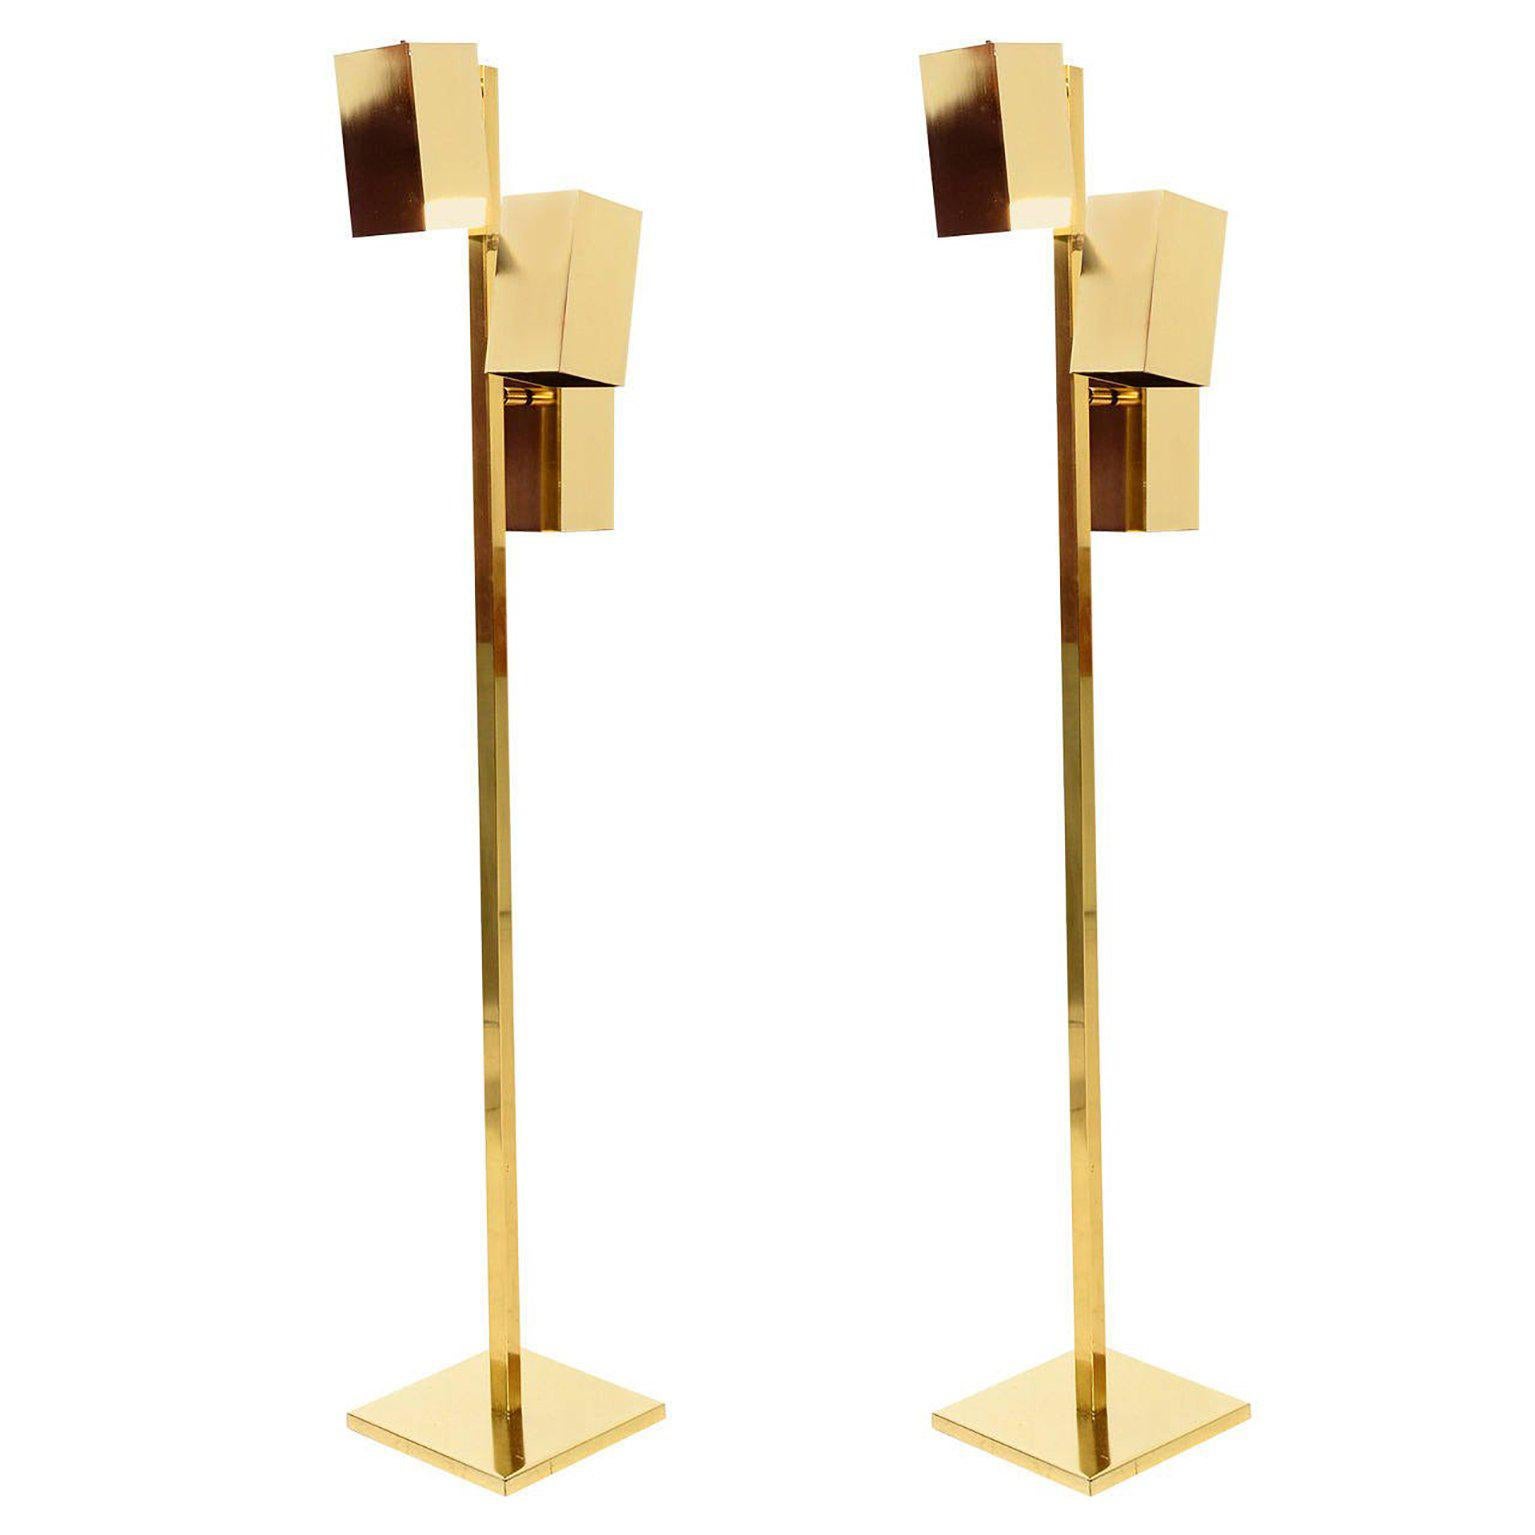 For your consideration a pair of Koch & Lowy brass floor lamps. Three adjustable shades can be positioned or adjusted as desired to control the light. Each light has a turn on an off switch.

Marked KOCH & LOWY in the hardware.

Lamps